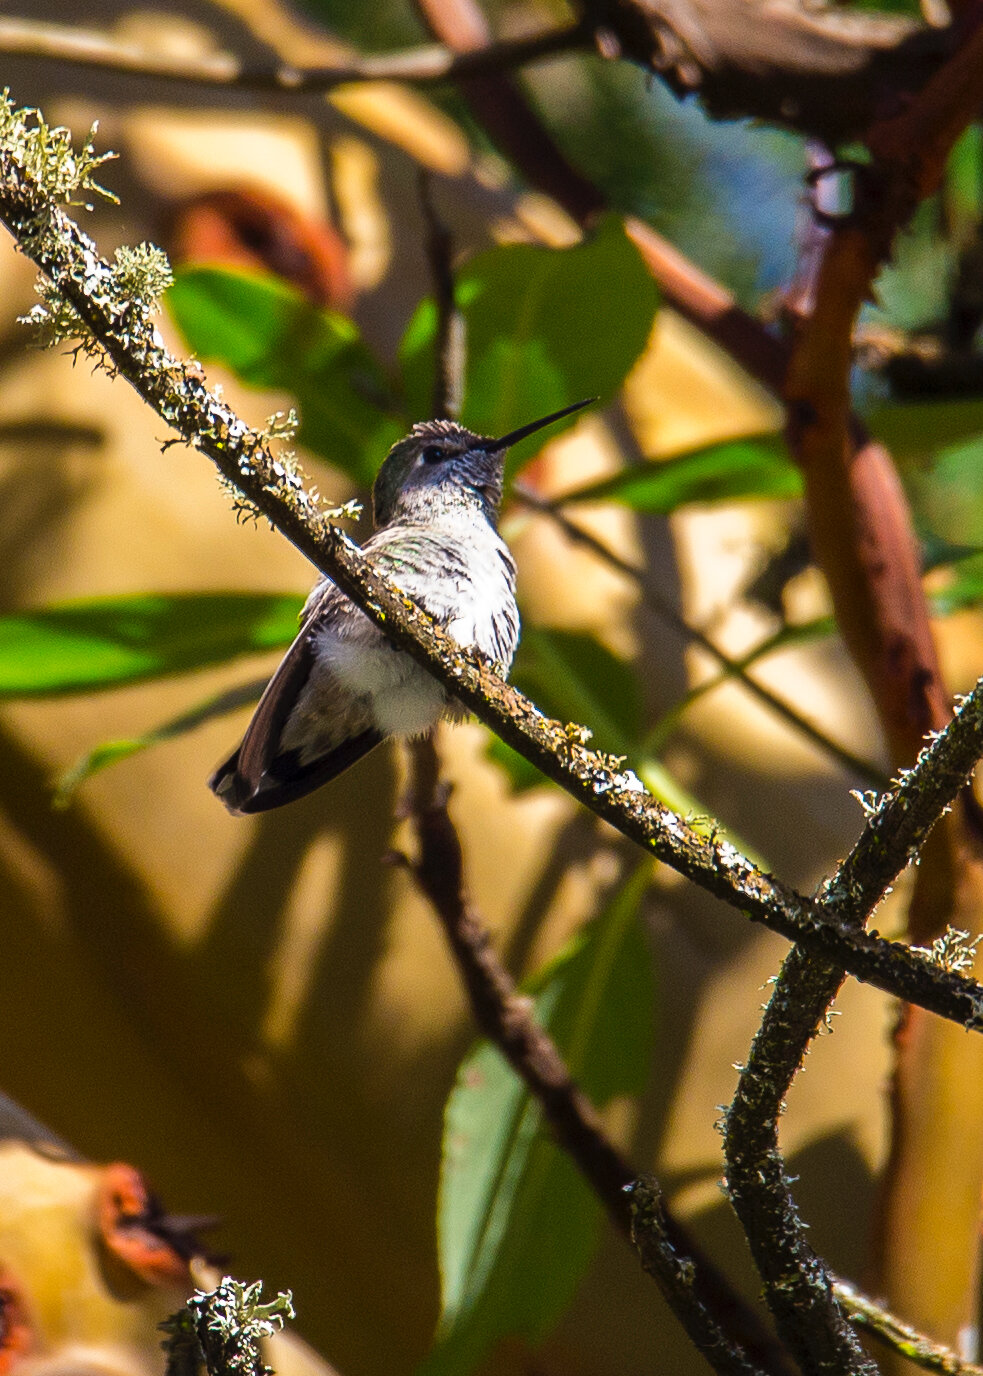  And finally, an Anna’s hummingbird that laso found the arbutus to its liking 